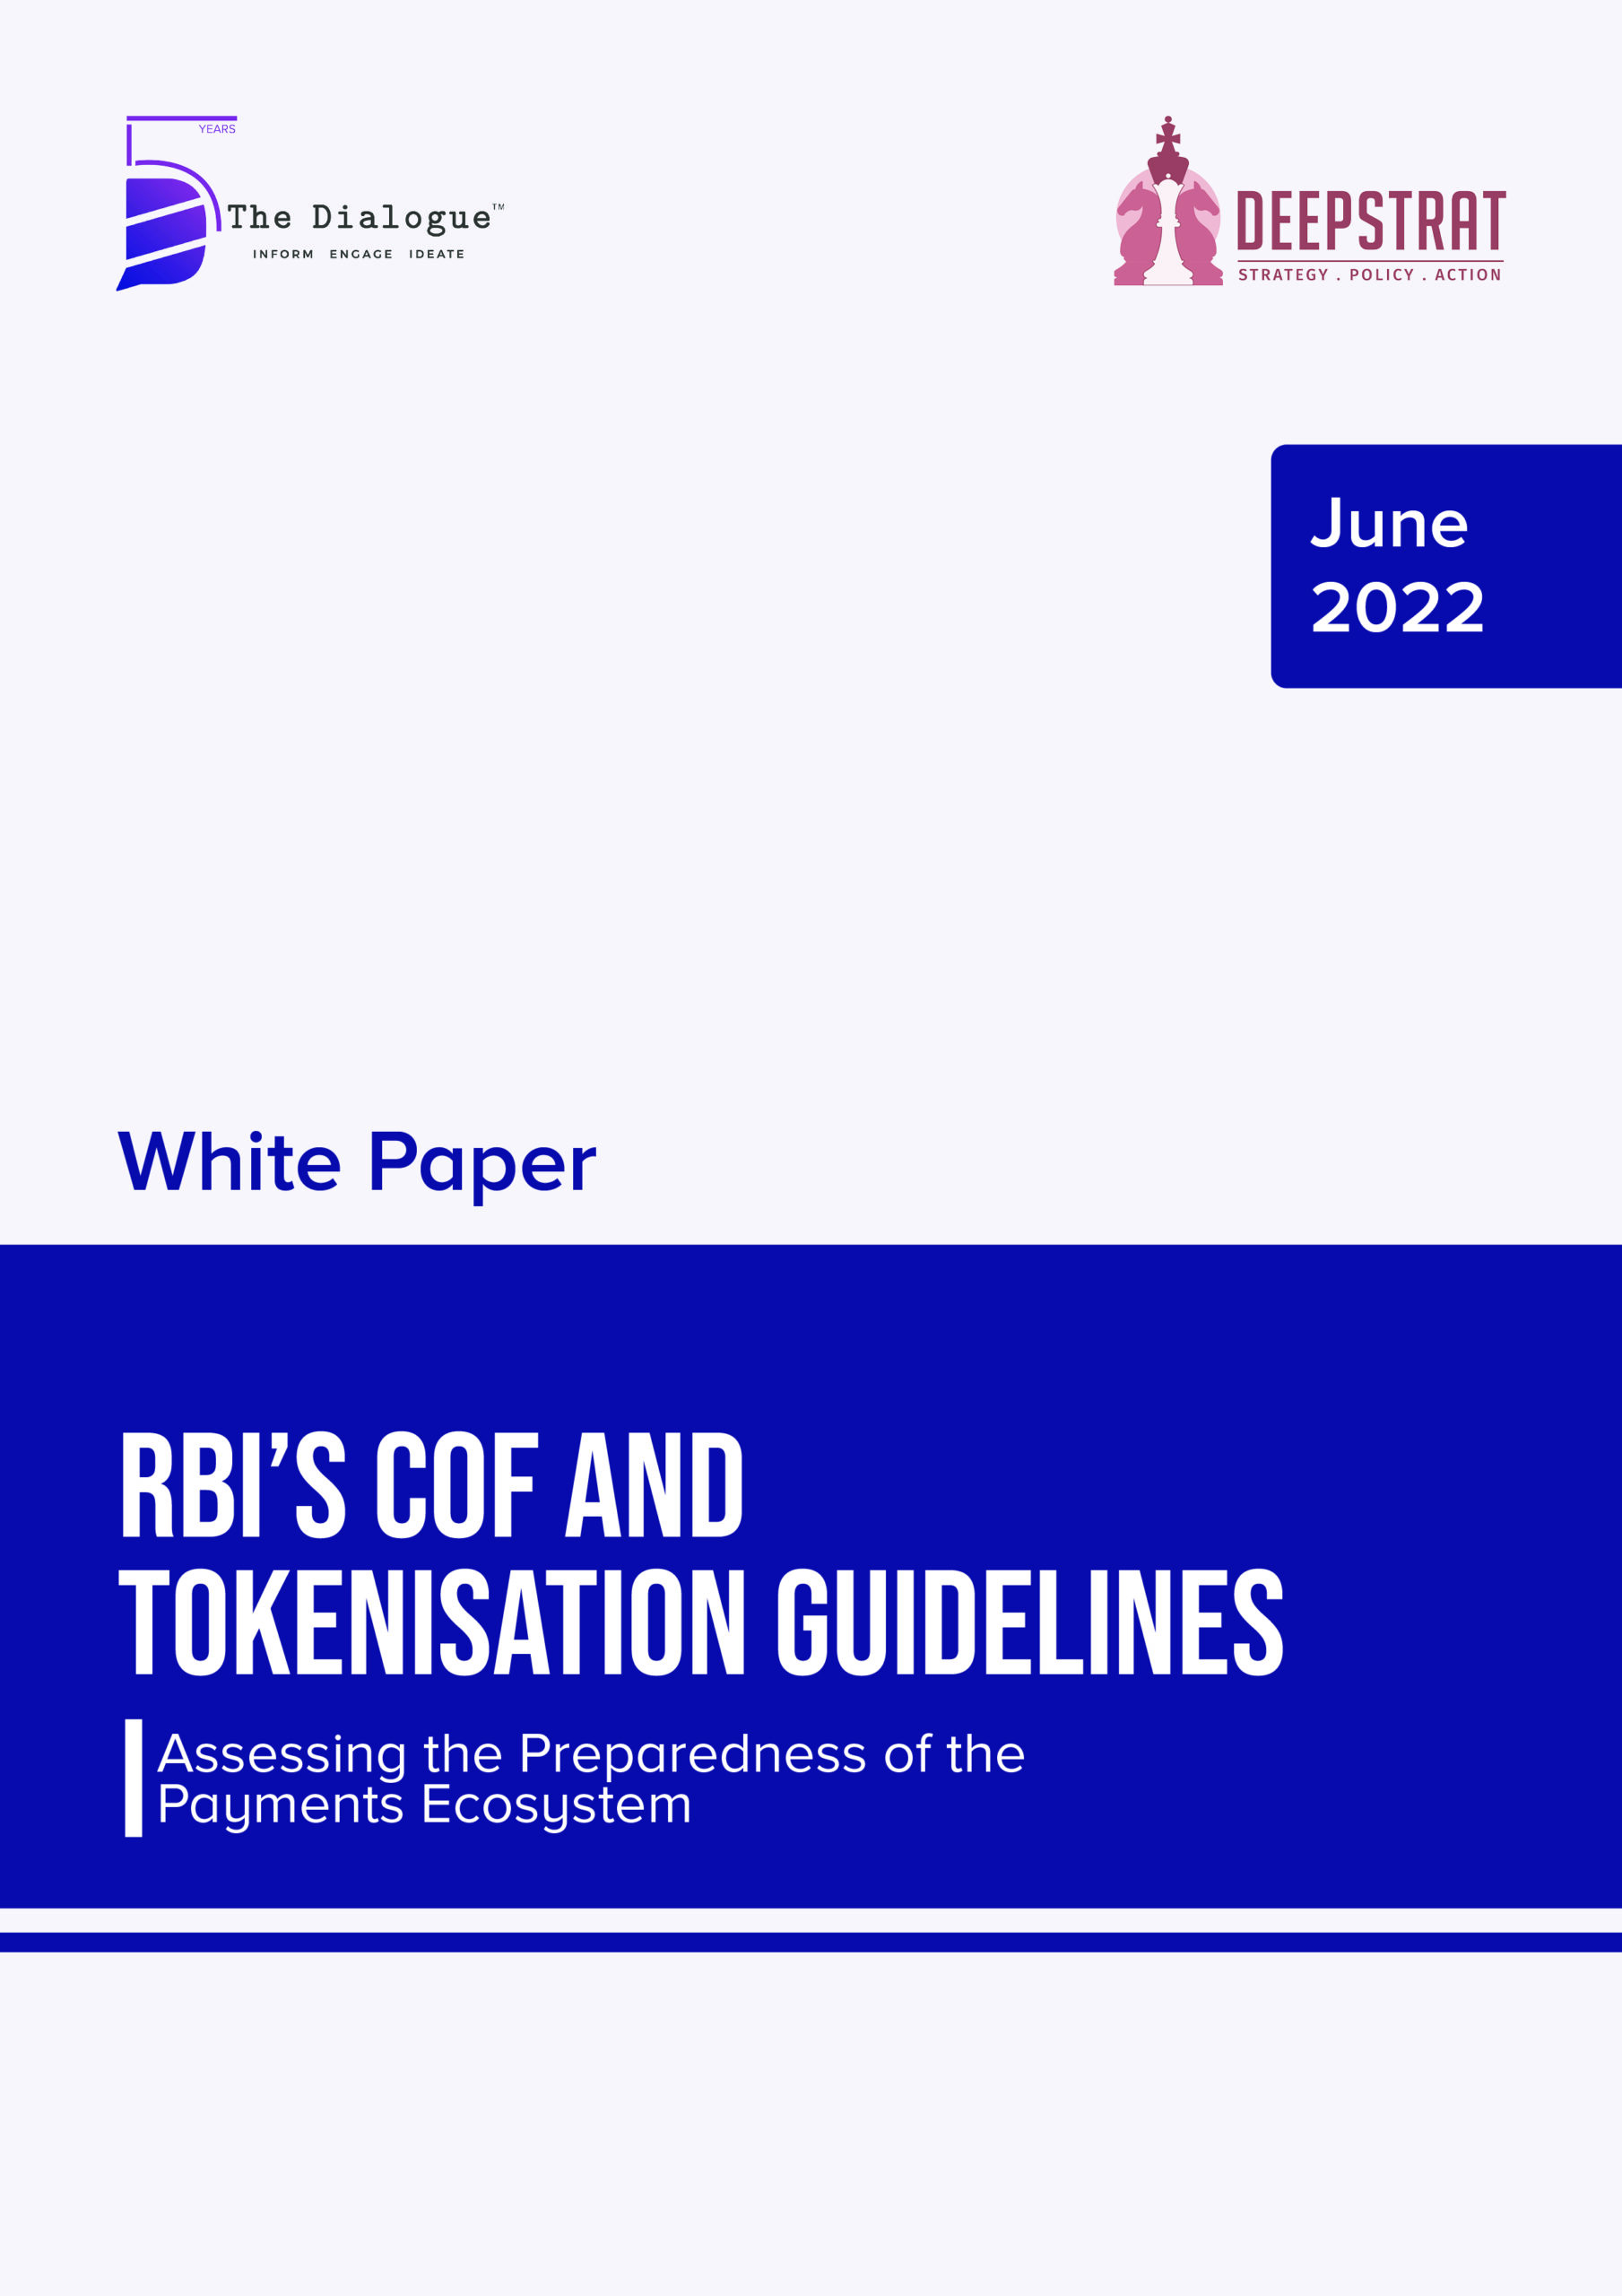 RBI’s CoF and Tokenisation Guidelines – Assessing the Preparedness of the Payments Ecosystem